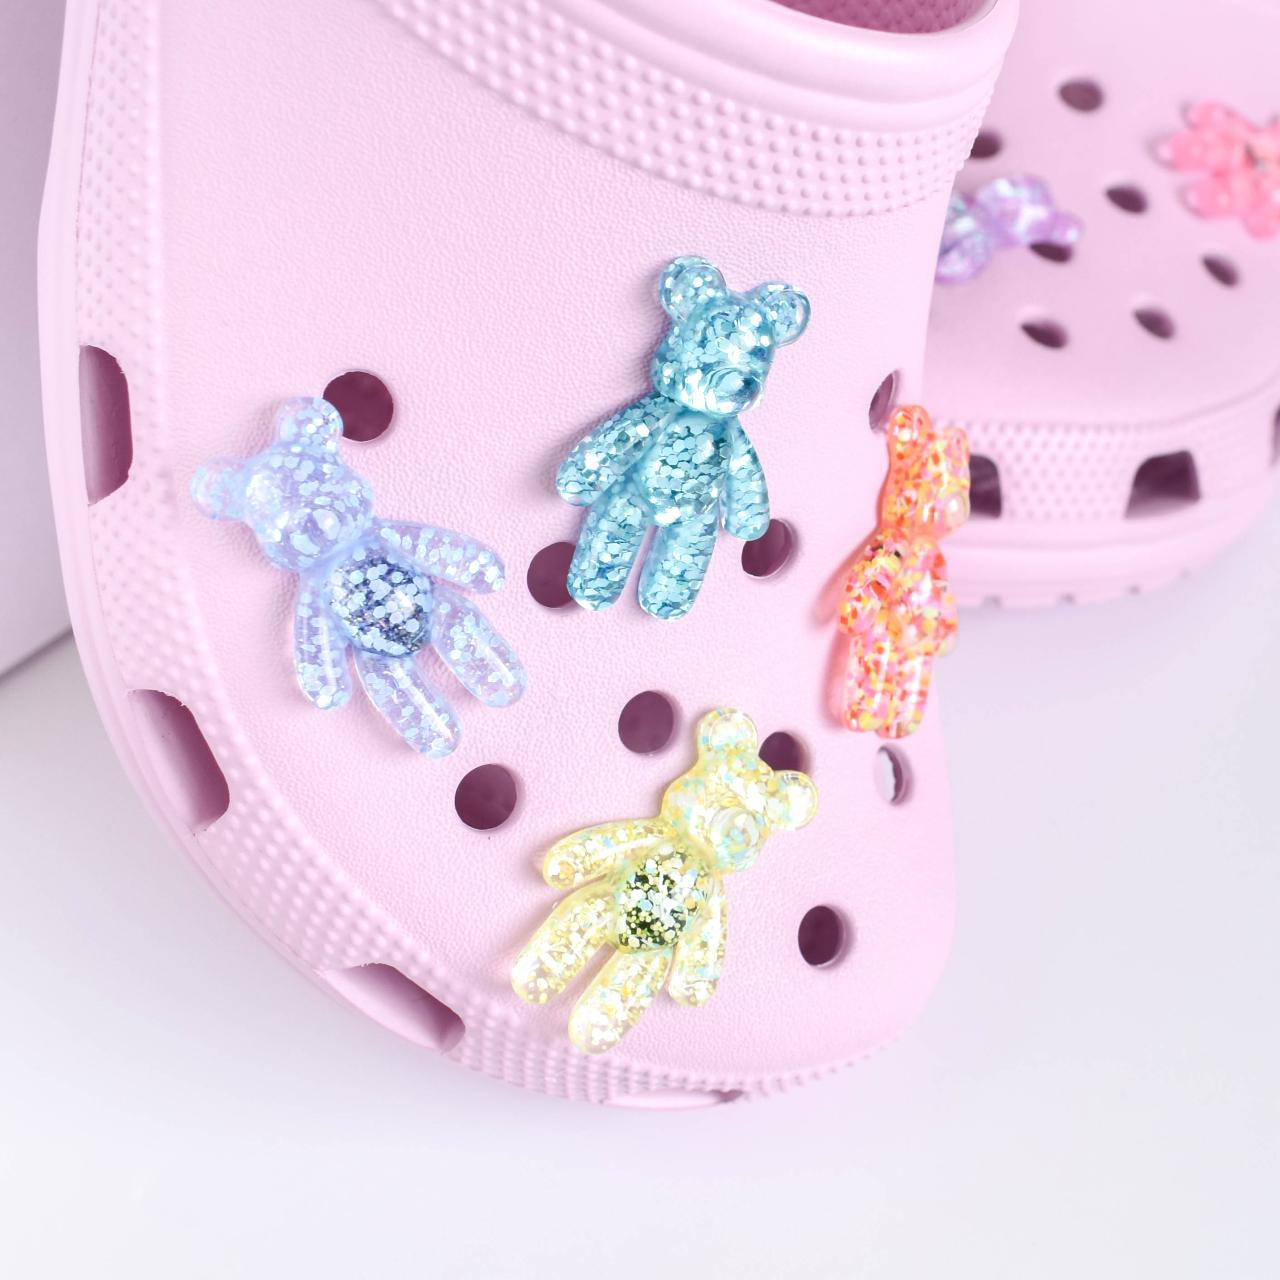 Gummy Bears Designer Croc Charms Set Fit Children Decorations For Shoes  Ornaments Women Accessories JIBZ Pins Wholesale From Meck, $0.72